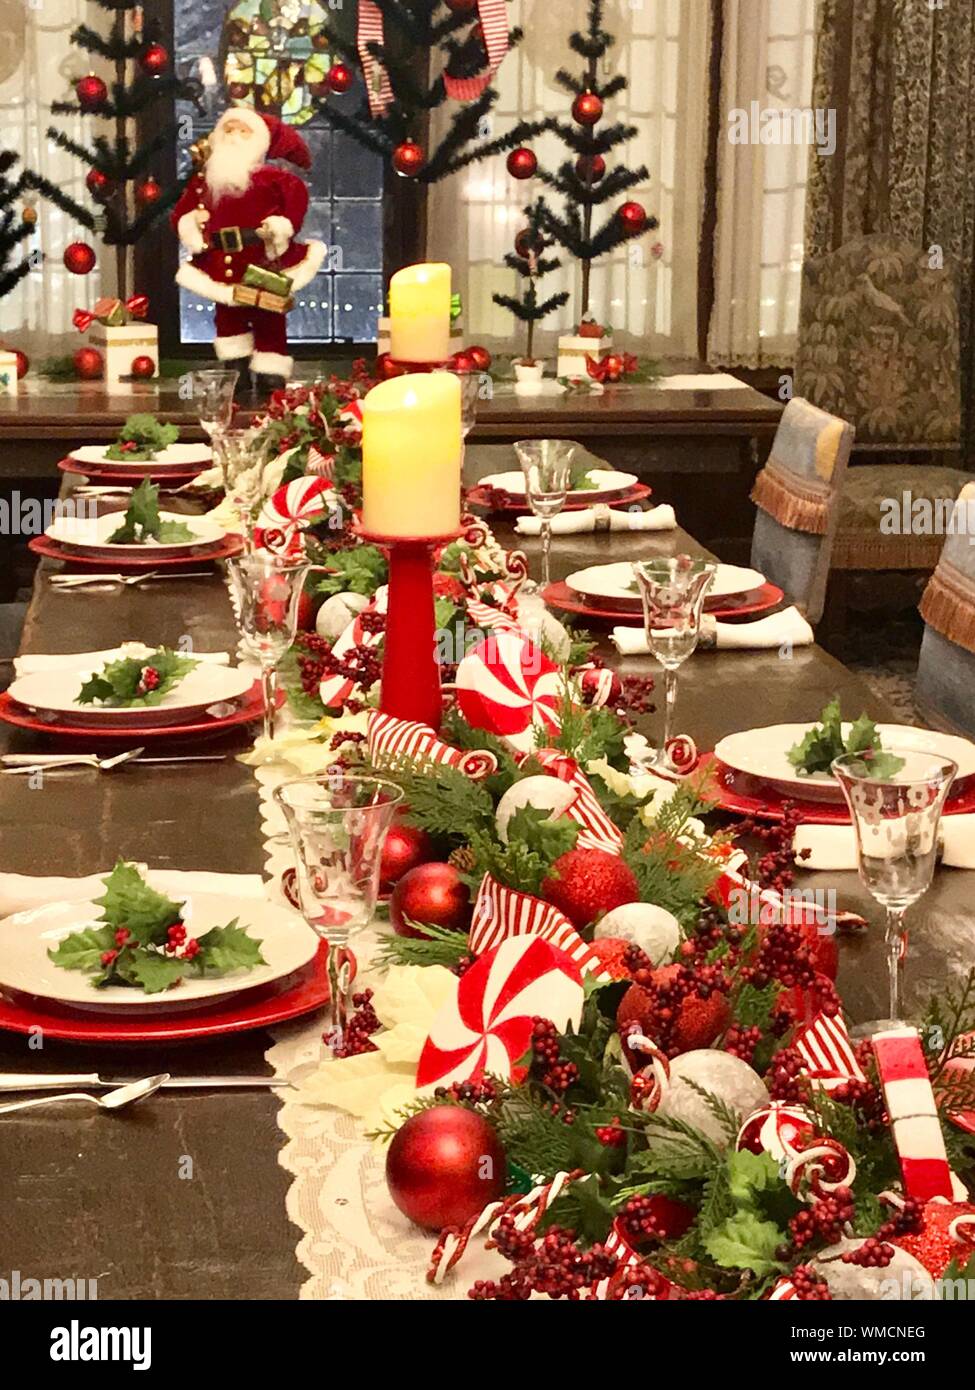 Christmas Decorations On Dining Table Stock Photo Alamy